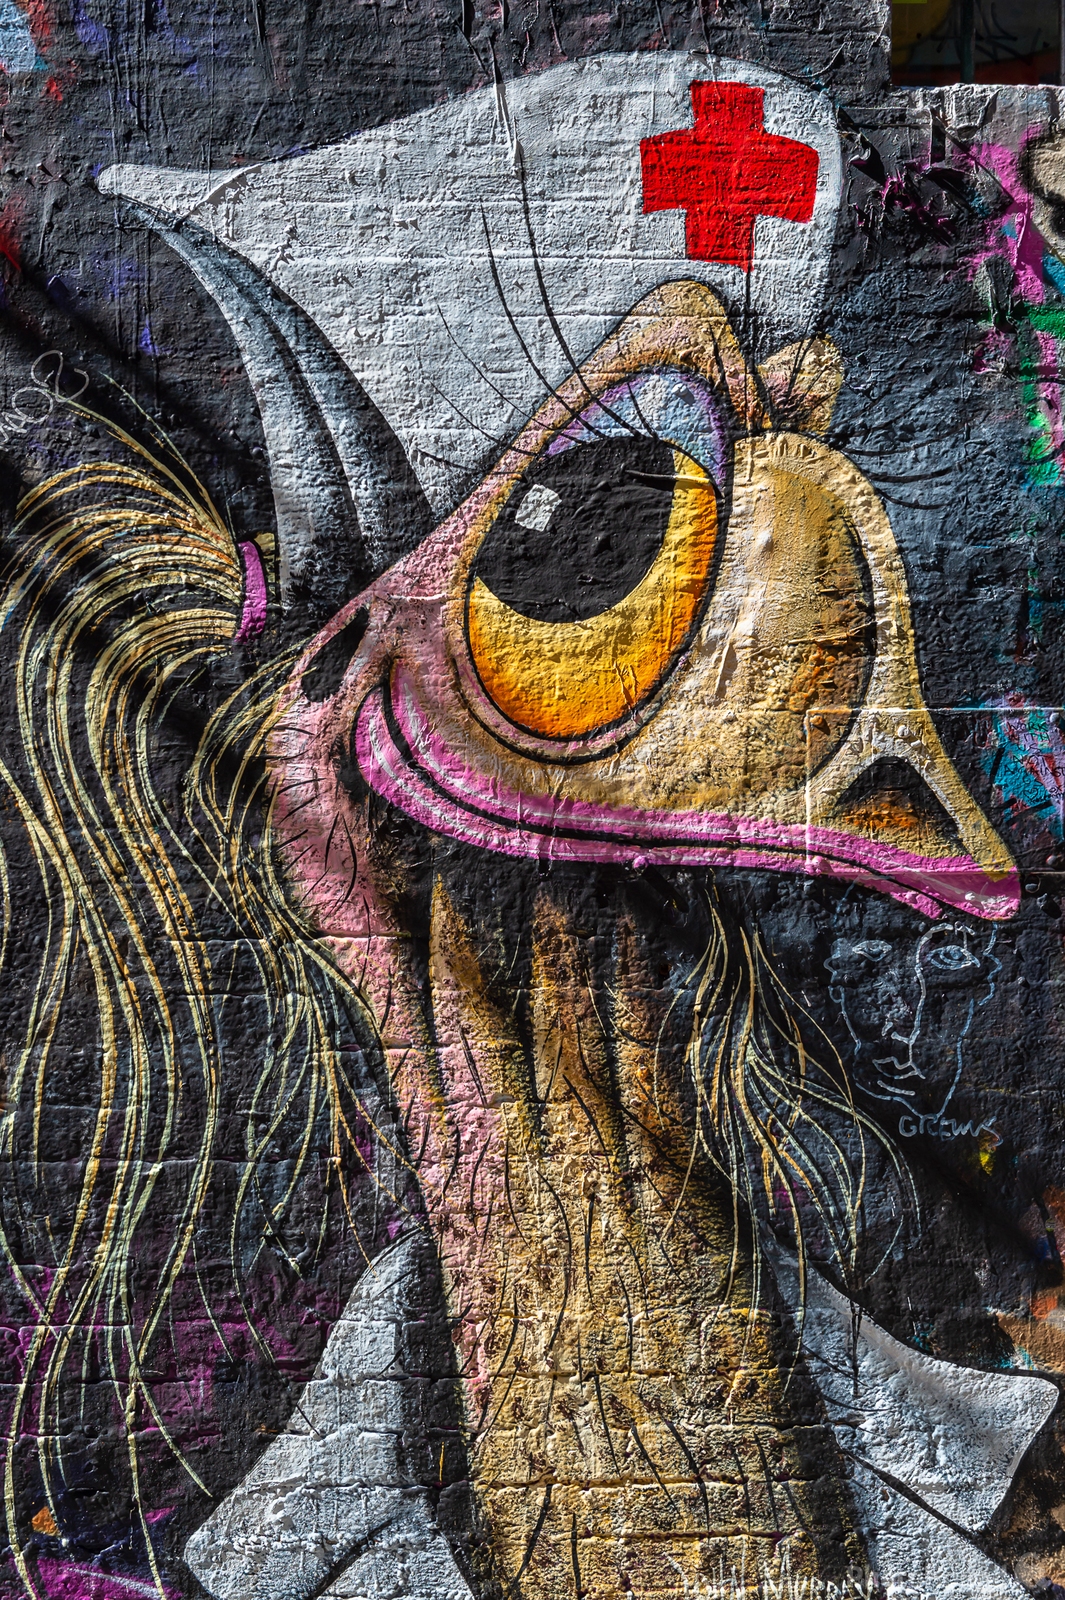 Image of Hosier Lane, Melbourne by Sue Wolfe